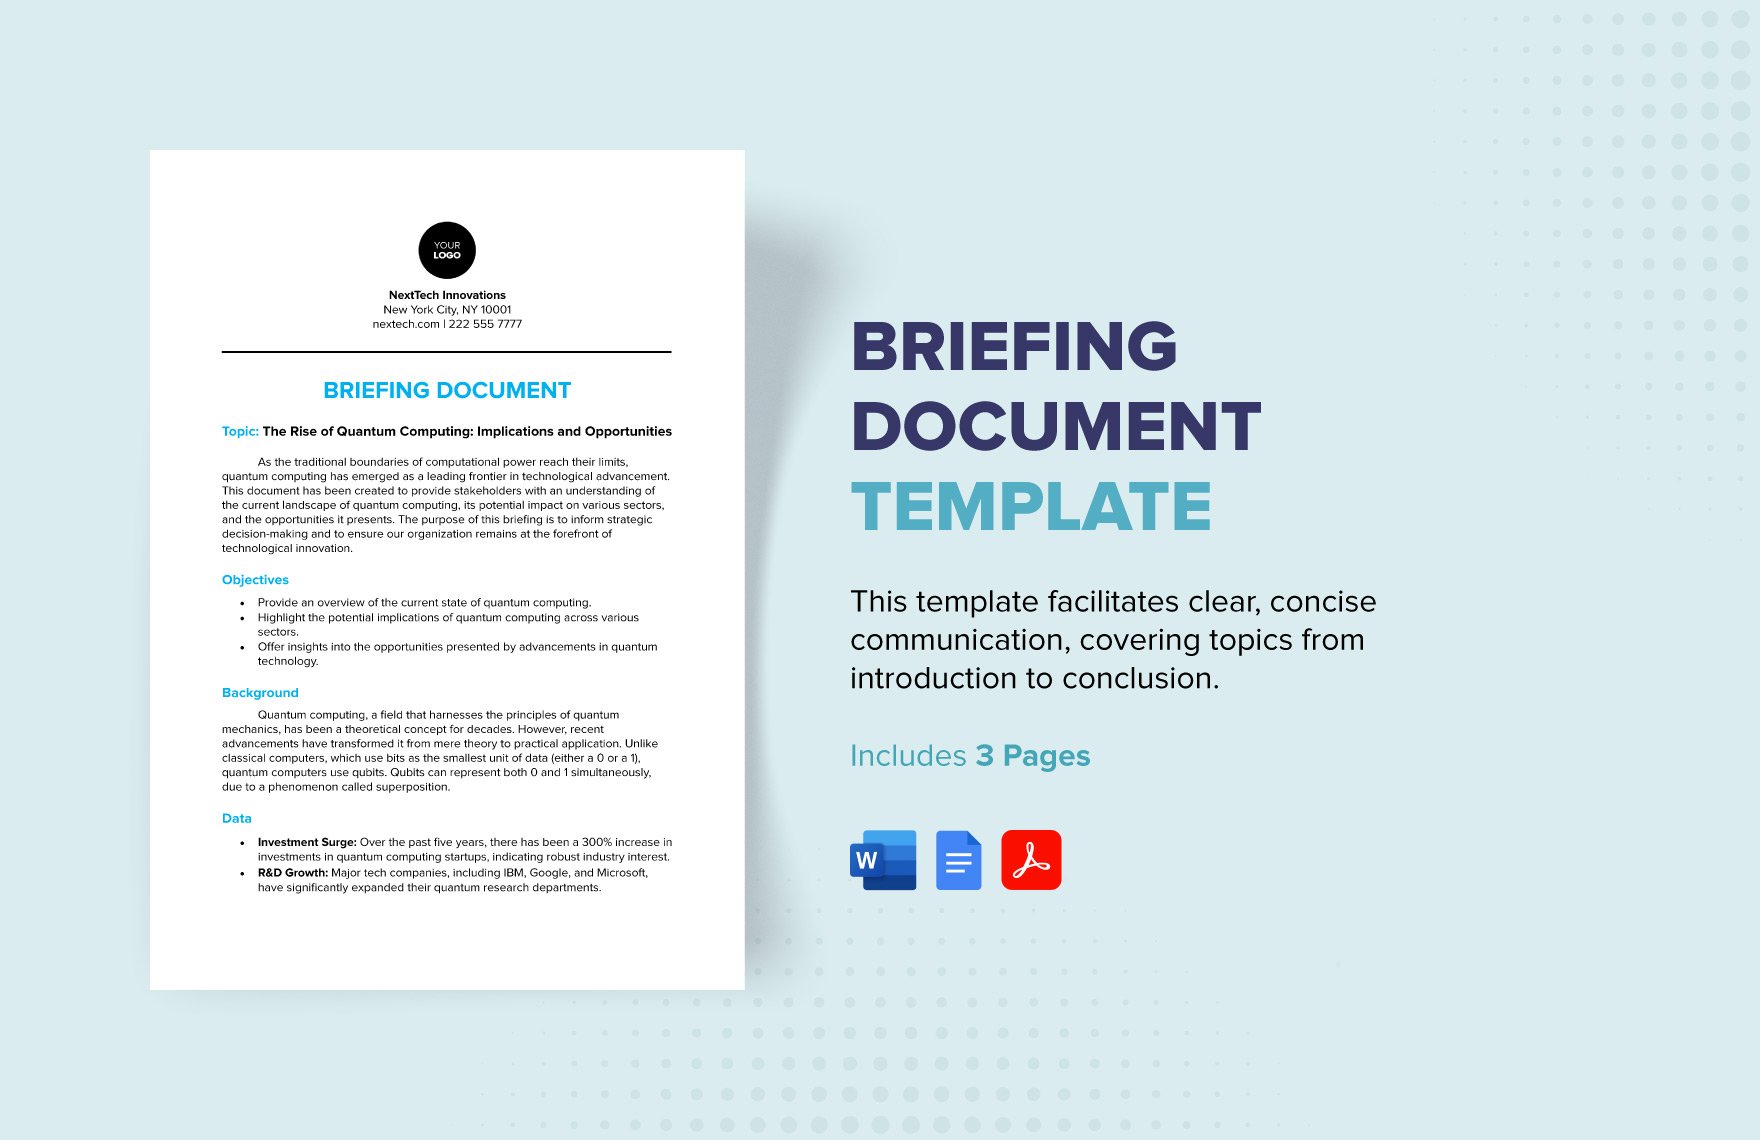 Free Briefing Document Template in Word, Google Docs, PDF